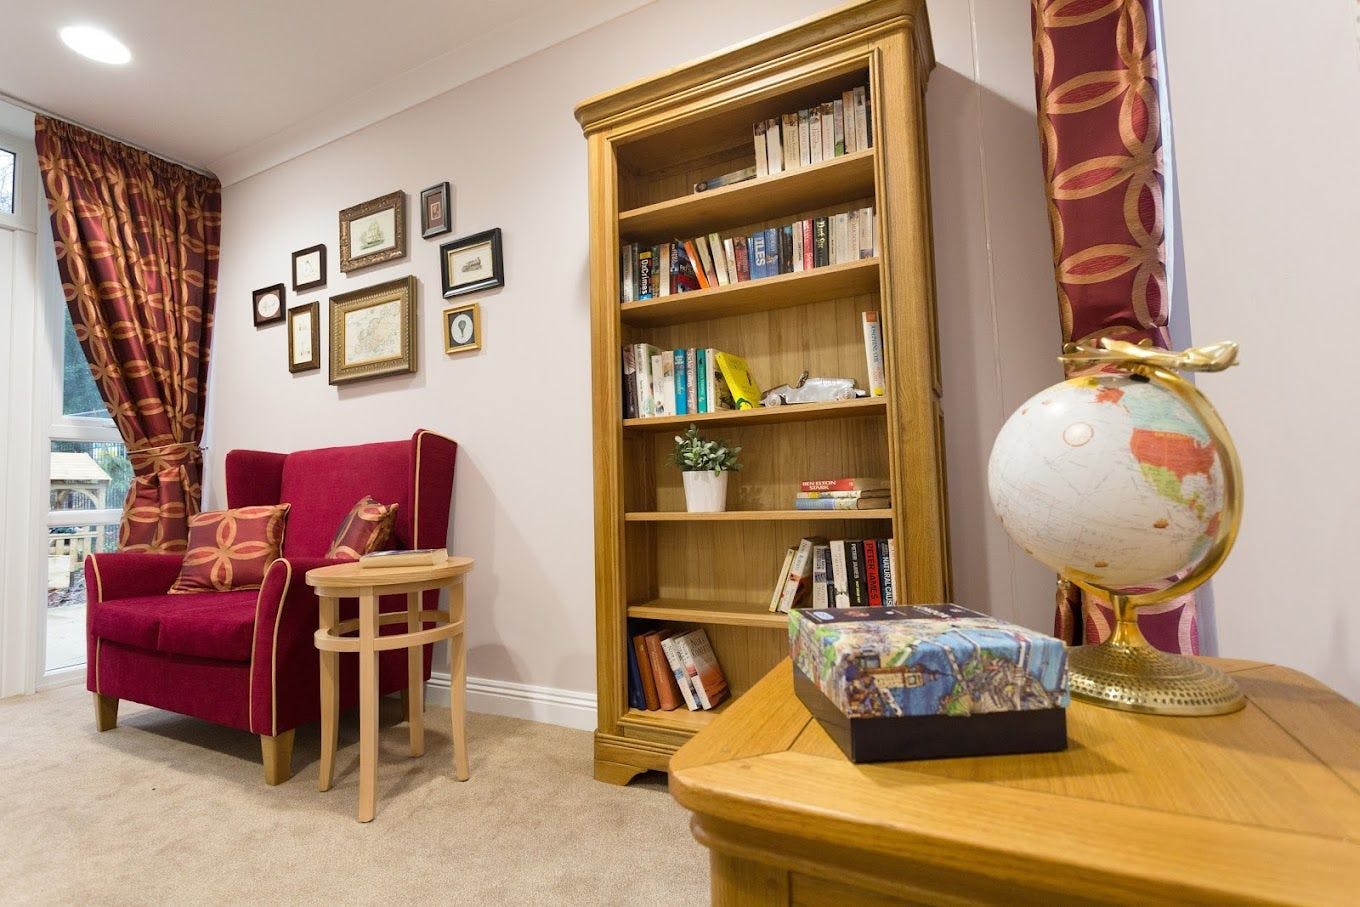 Communal Area at Chilterns Court Care Home in Henley-on-Thames, Oxfordshire